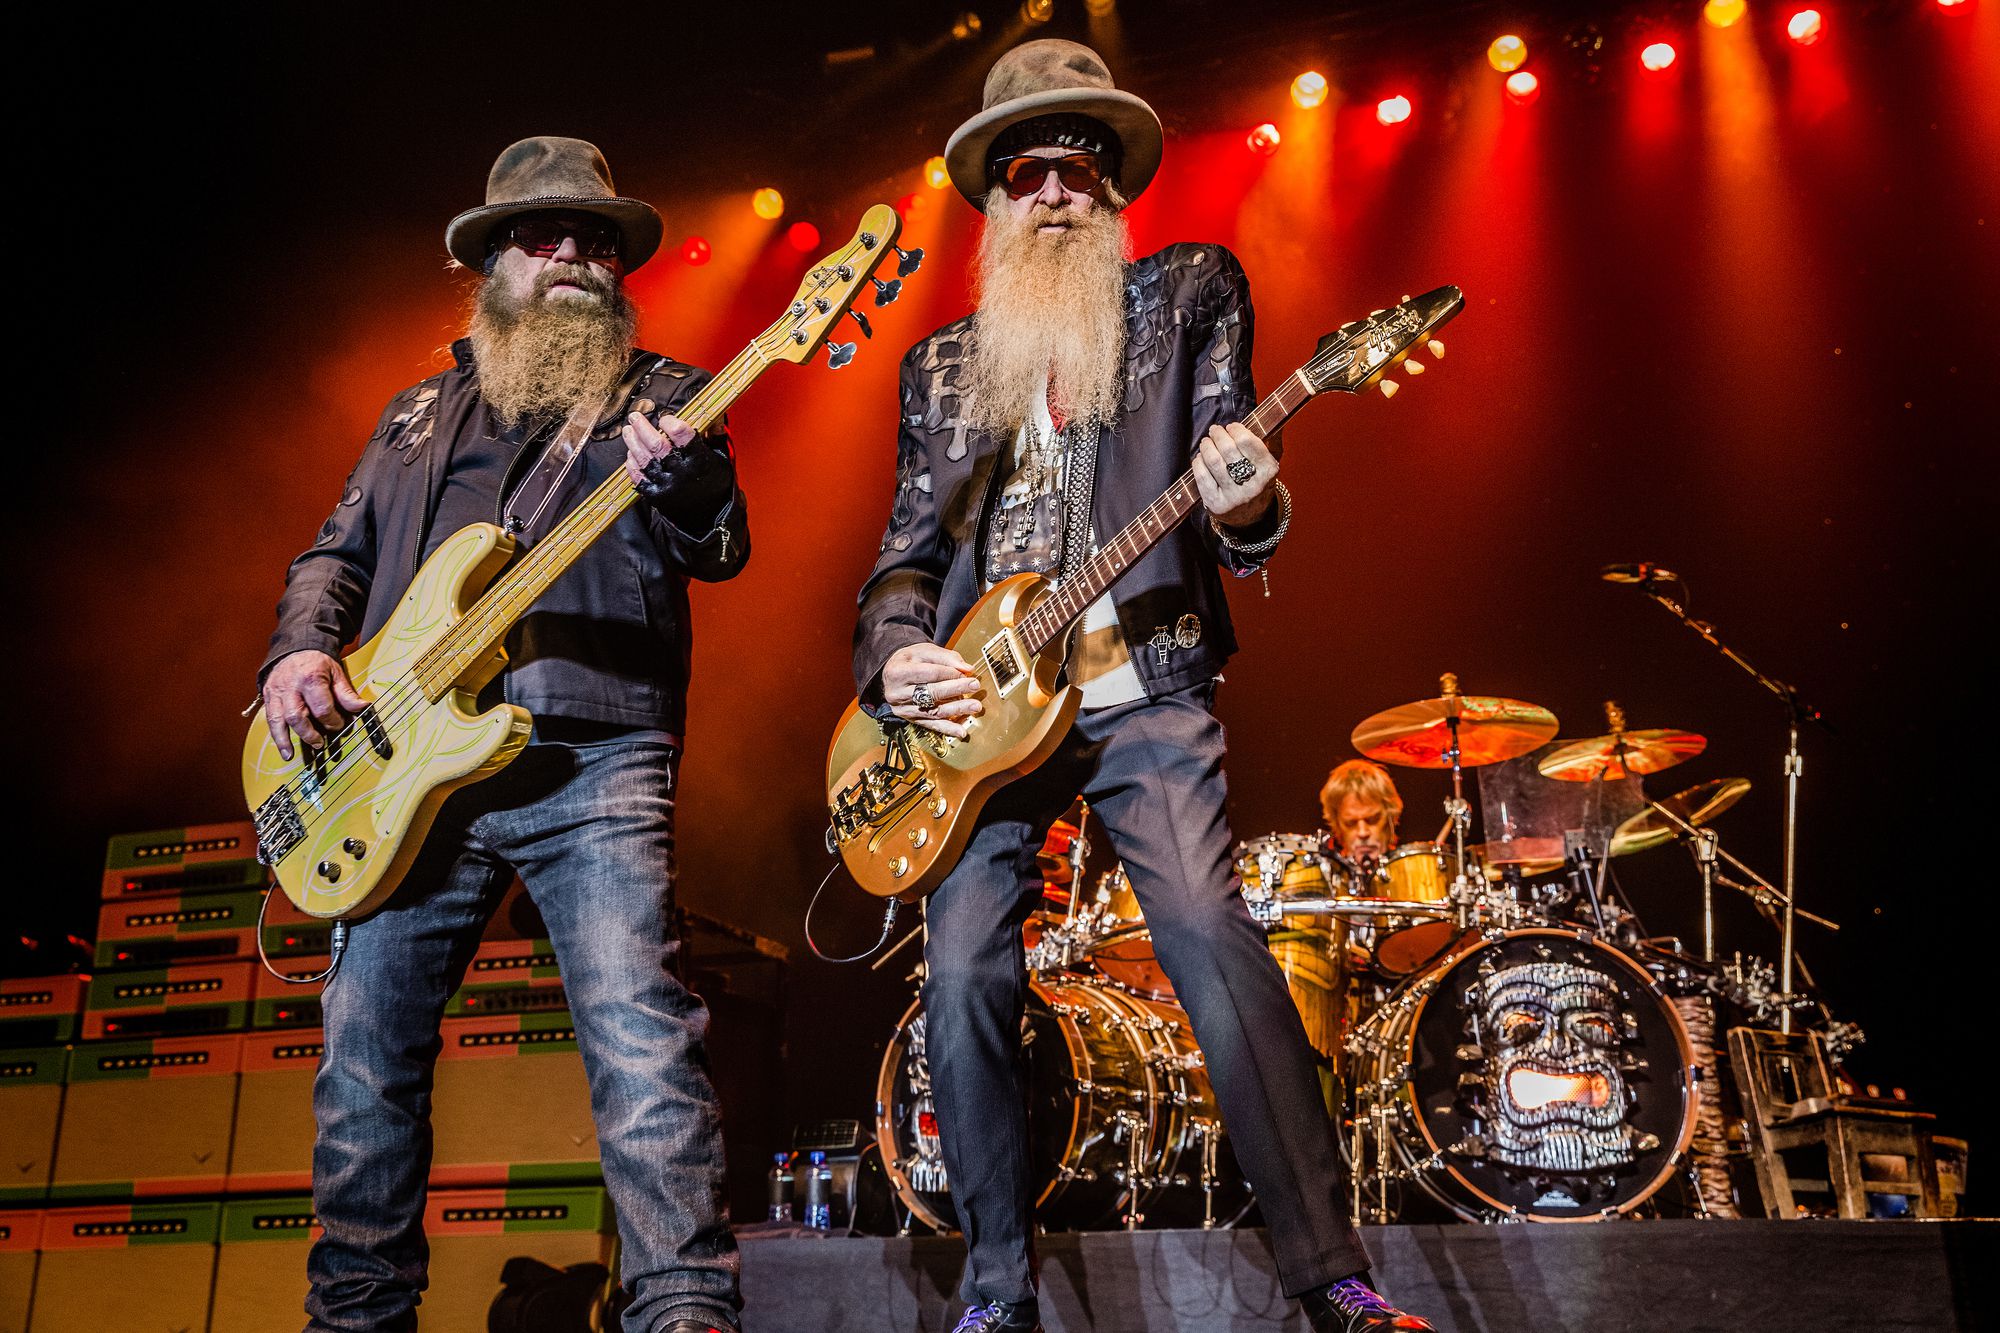 <p>That li’l old band from Texas, ZZ Top, formed in 1969 and never had a single lineup change – it was always guitarist Billy Gibbons, bassist Dusty Hill, and drummer Frank Beard, who ironically was the only one without a beard. Known for hits like "La Grange" and "Tush" from the 1970s and 1980s hits like “Sharp Dressed Man,” the band was a consistent concert draw, but sadly, in 2021, Hill passed away while the band was on tour. Well, it was simply a matter of getting their guitar tech, Elwood Francis, to step up to the plate, and now he’s the bassist. <a href="https://www.zztop.com/tour">Go see them on tour</a>!</p>